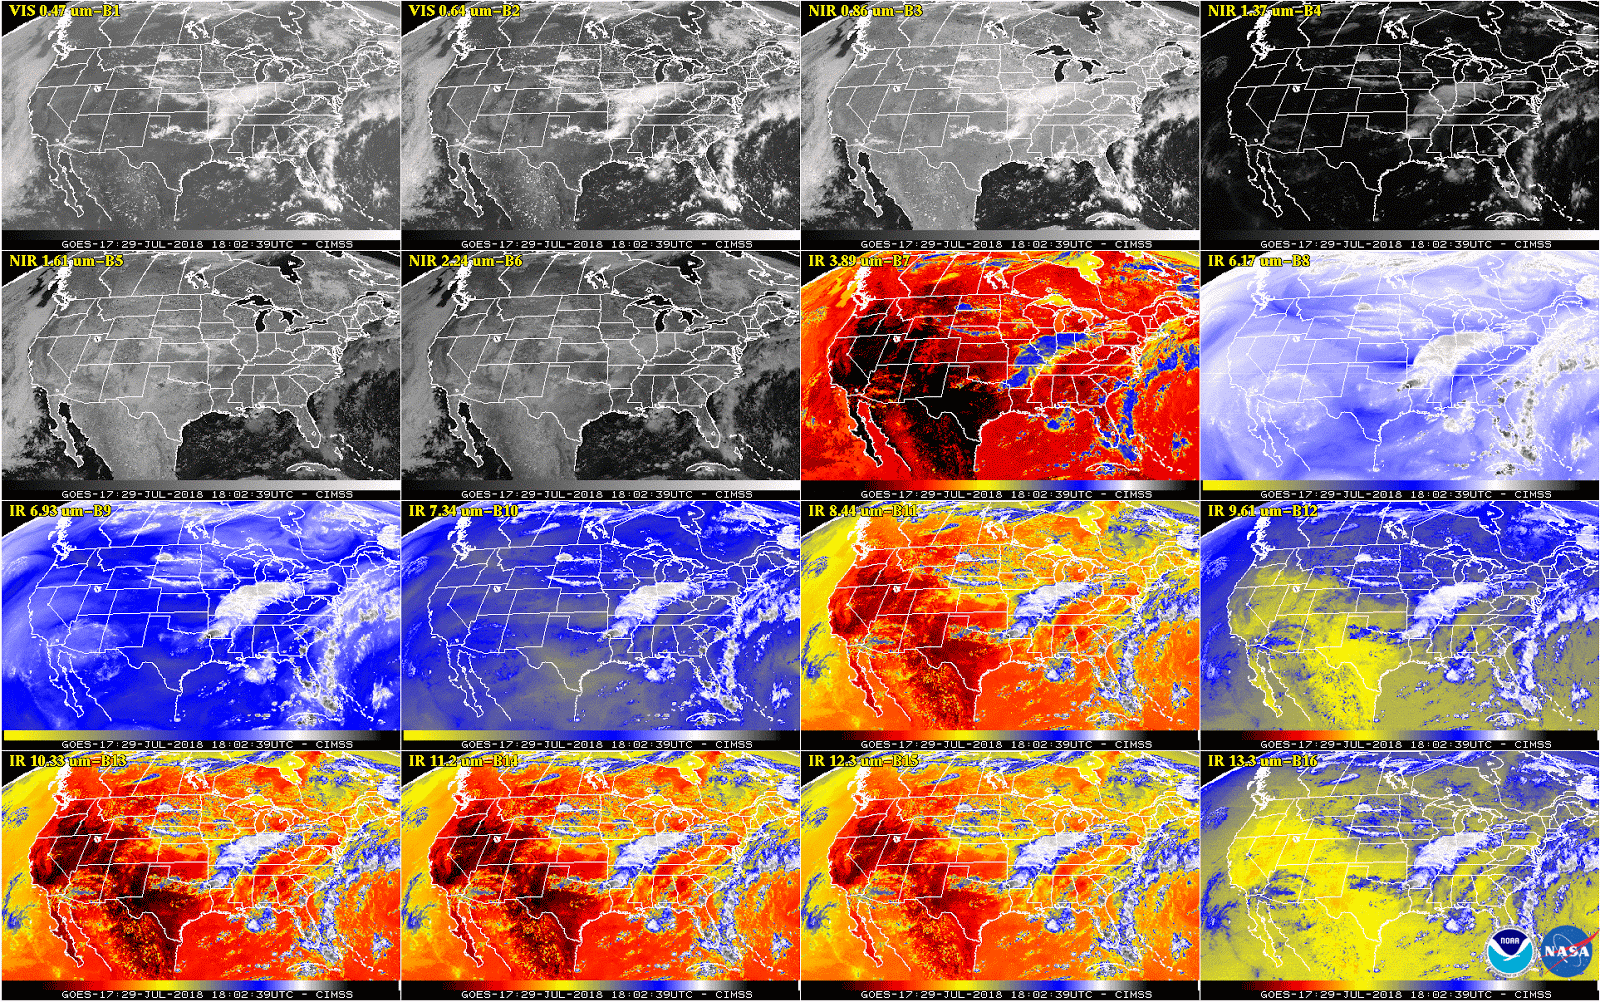 NOAA Shares First Infrared Imagery from GOES-17 Satellite